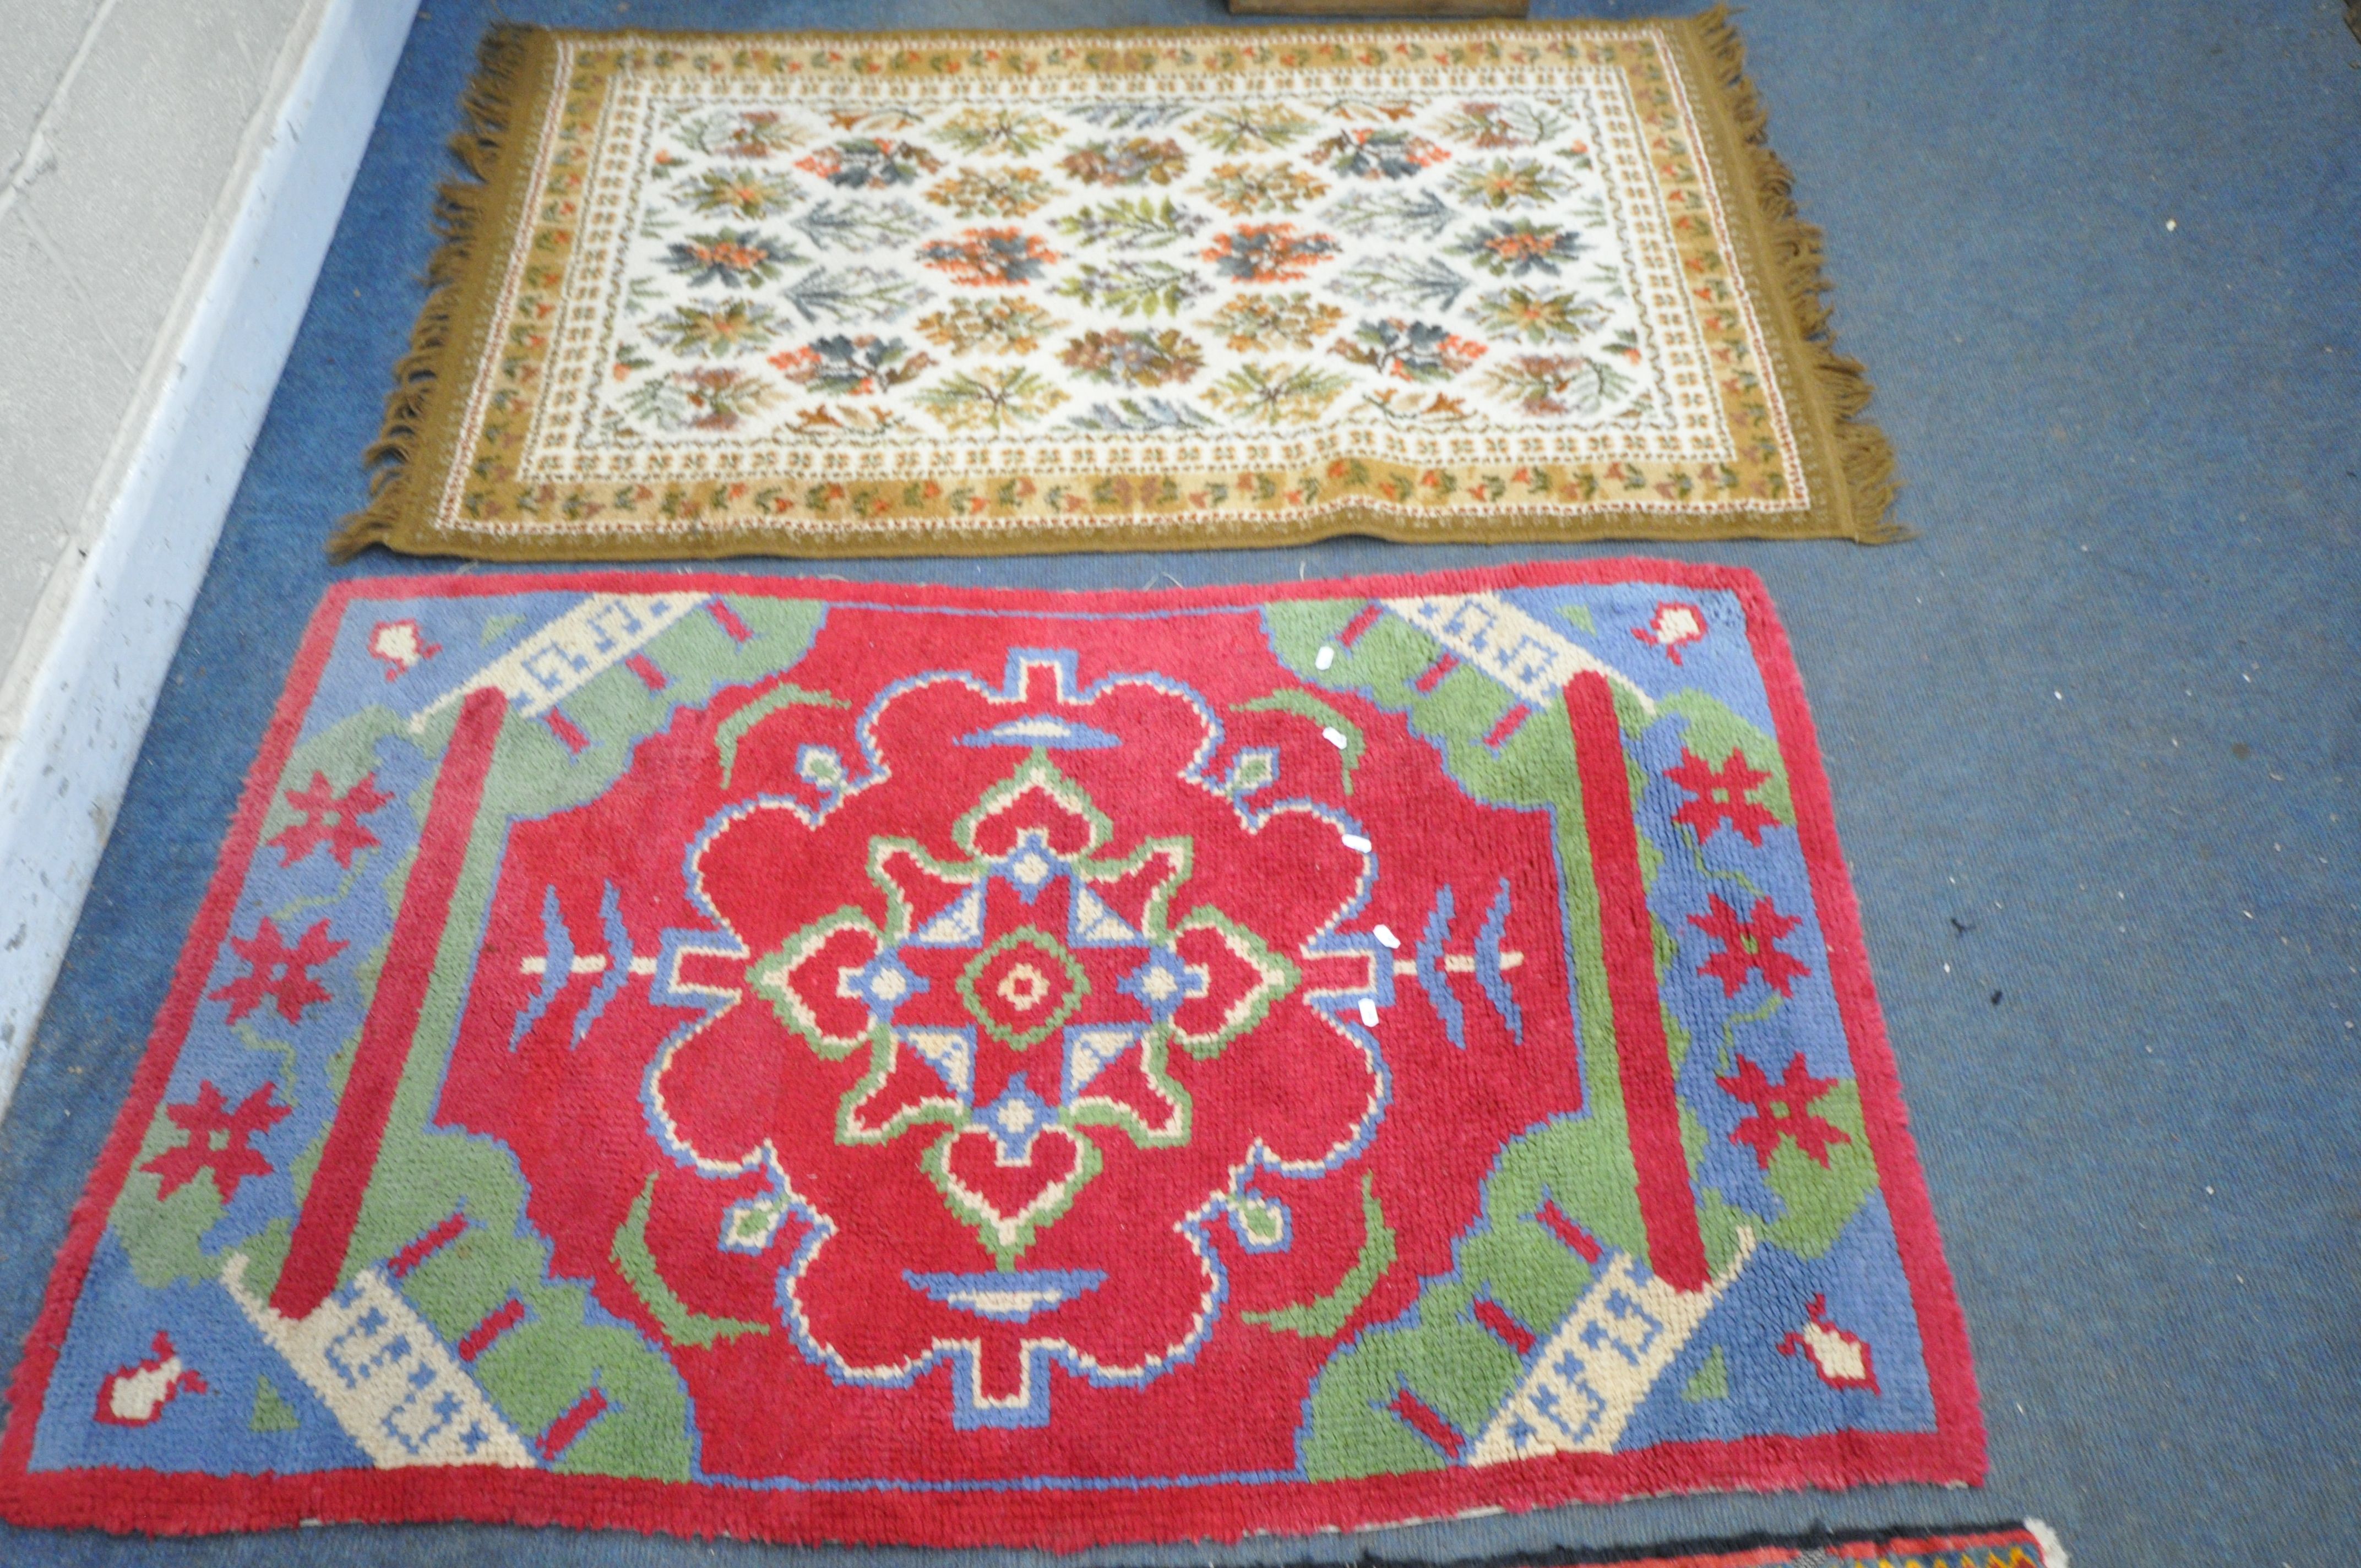 TWO WOOL PERSIAN RUGS, both of similar patterns, largest rug measurements, 155cm x 97cm, along - Image 6 of 6